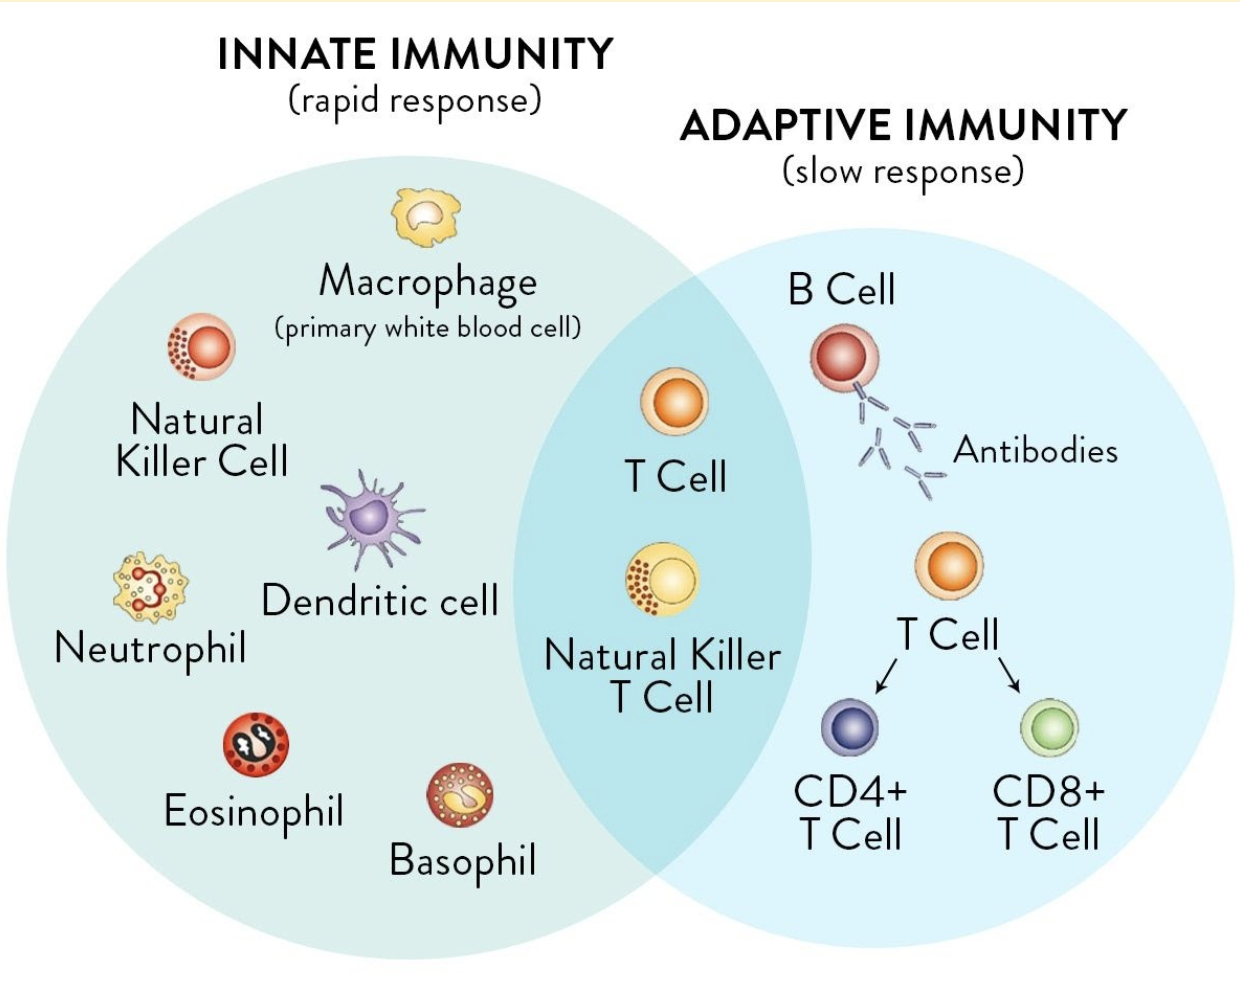 Shining the Light on the Immune System, Part 5: Meet Your Adaptive Immunity